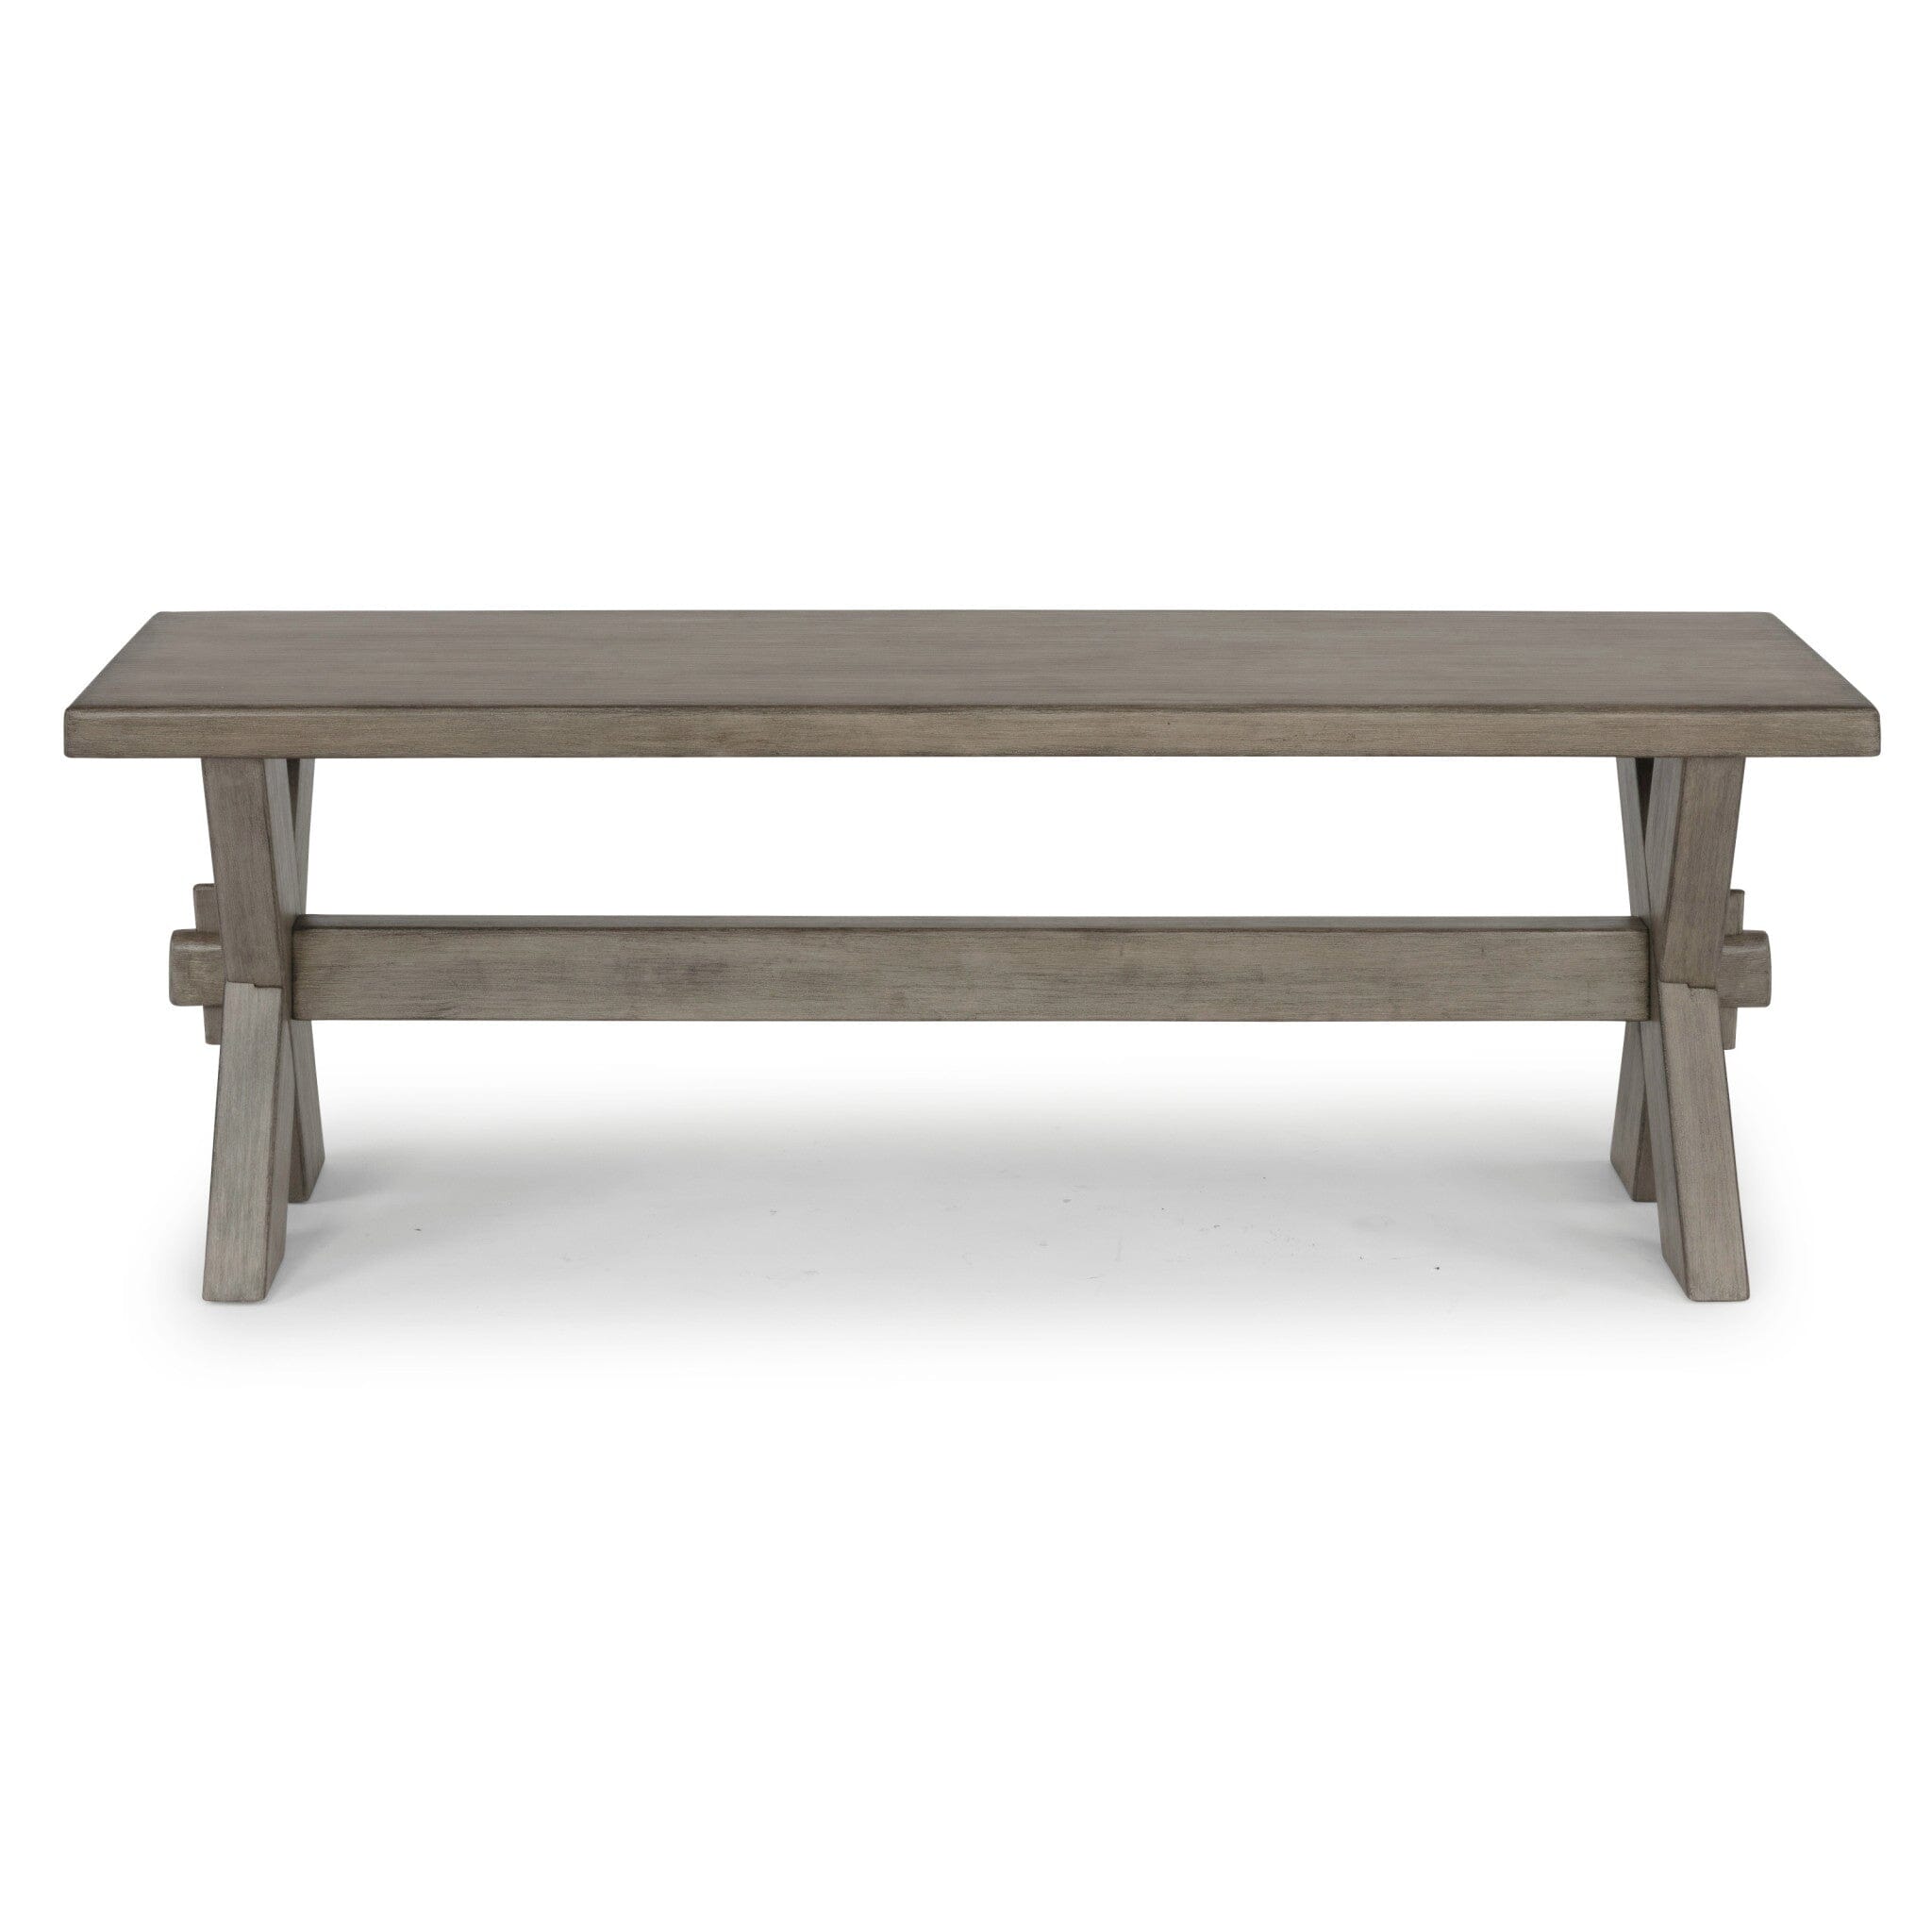 Rustic Farmhouse Dining Bench By Mountain Lodge Dining Bench Mountain Lodge